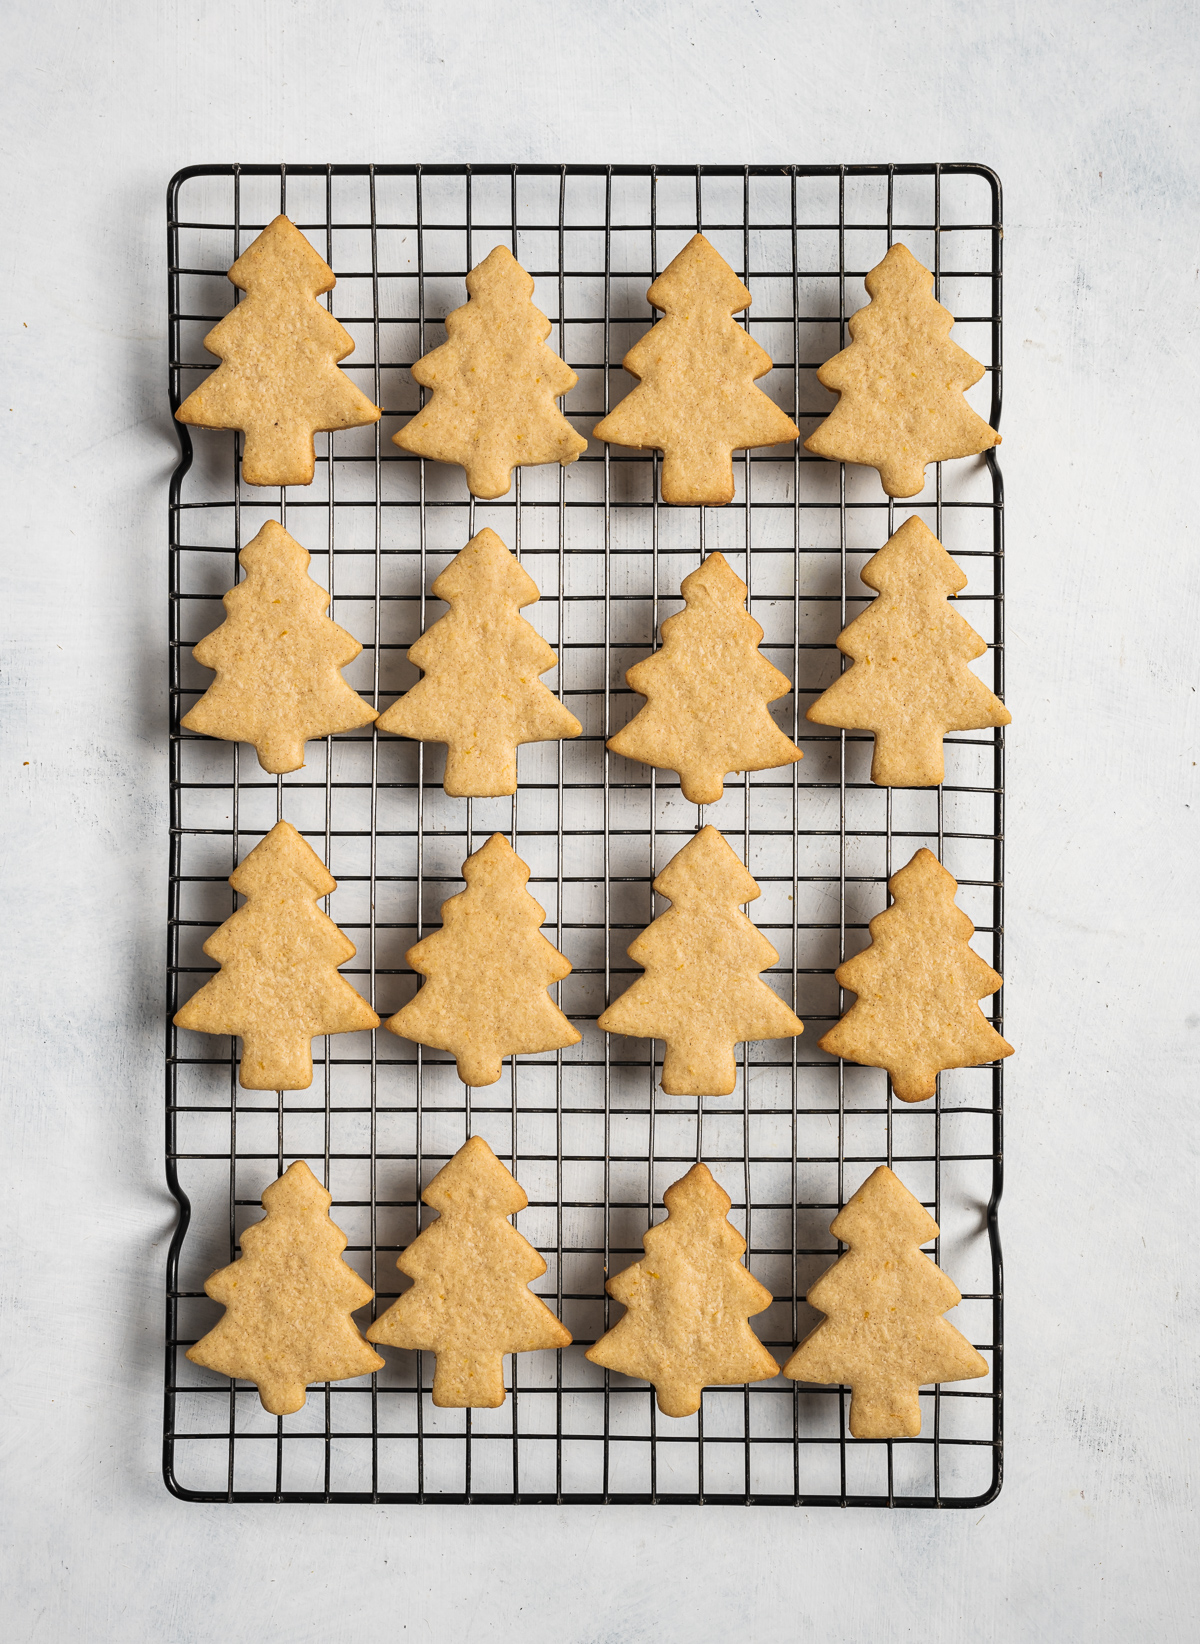 baked tree shaped cookies on wire cooling rack